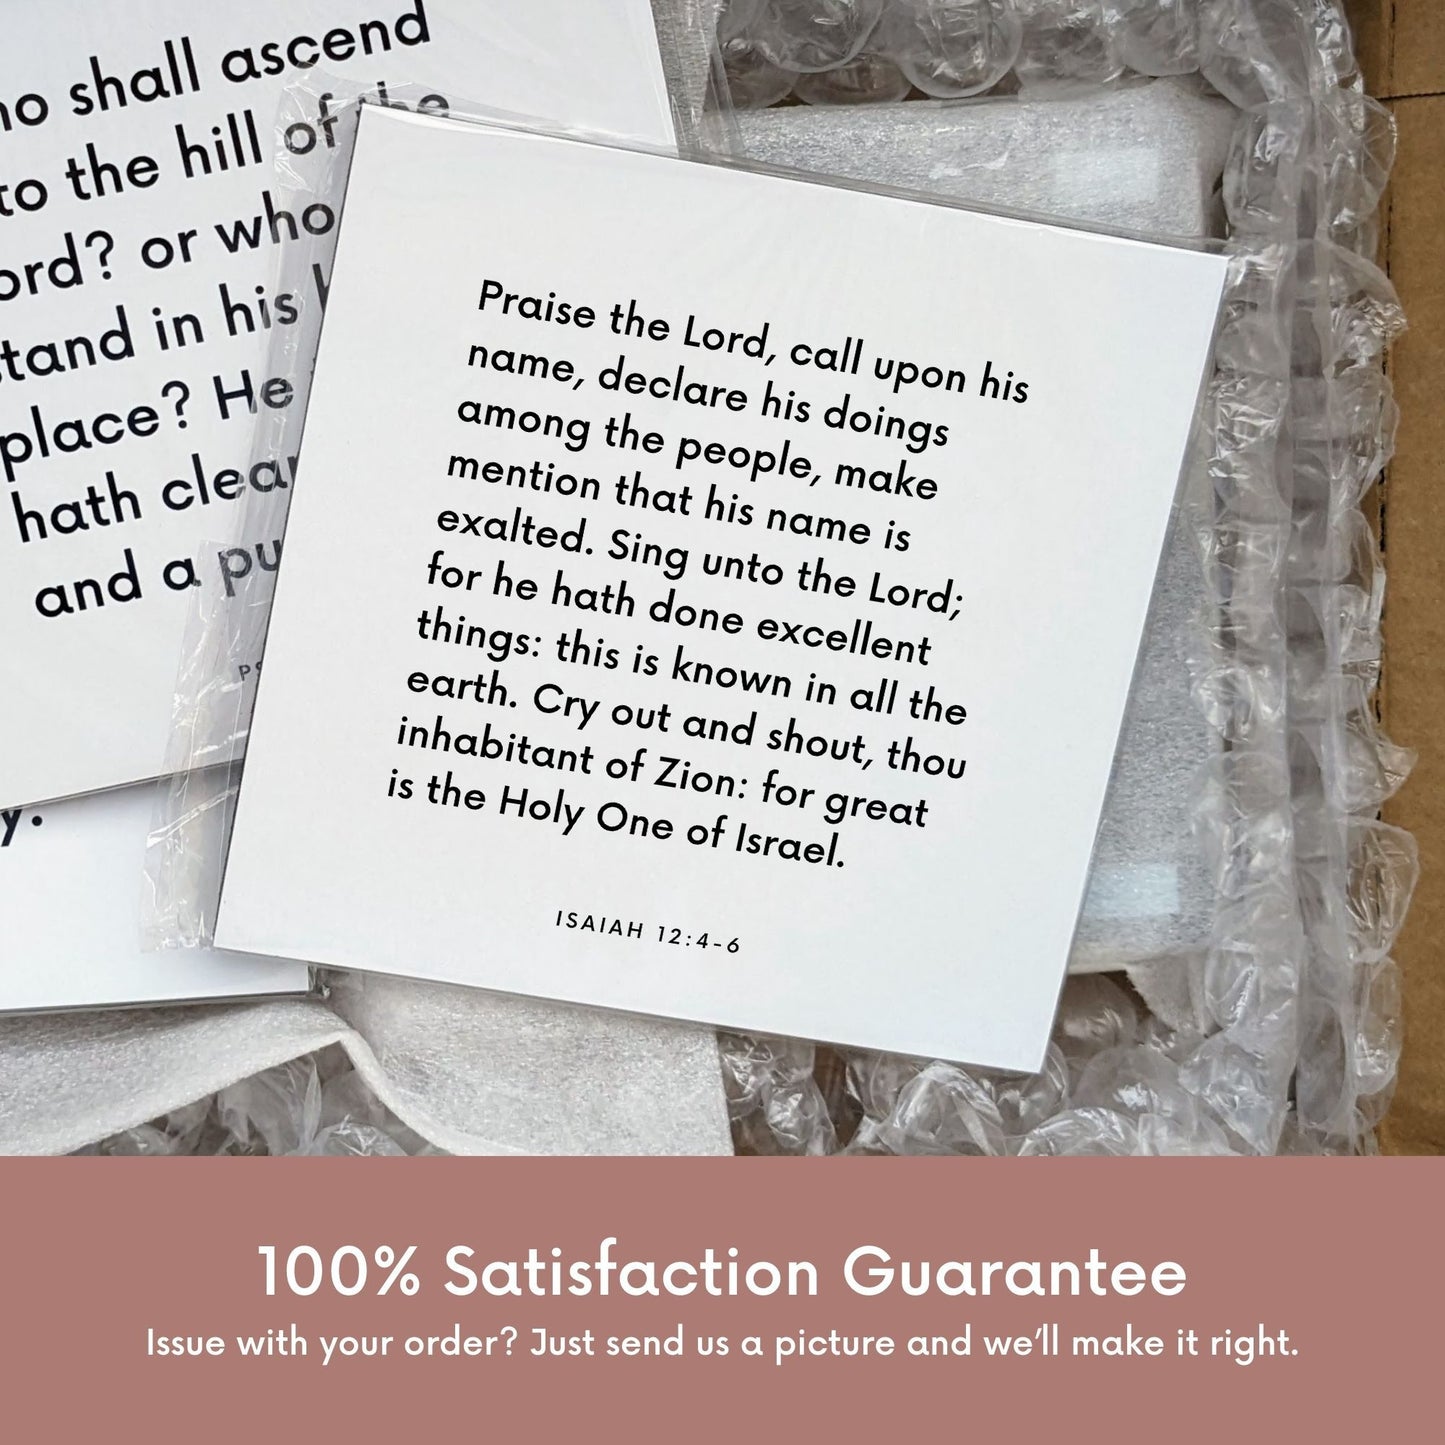 Shipping materials for scripture tile of Isaiah 12:4-6 - "Praise the Lord, call upon his name"